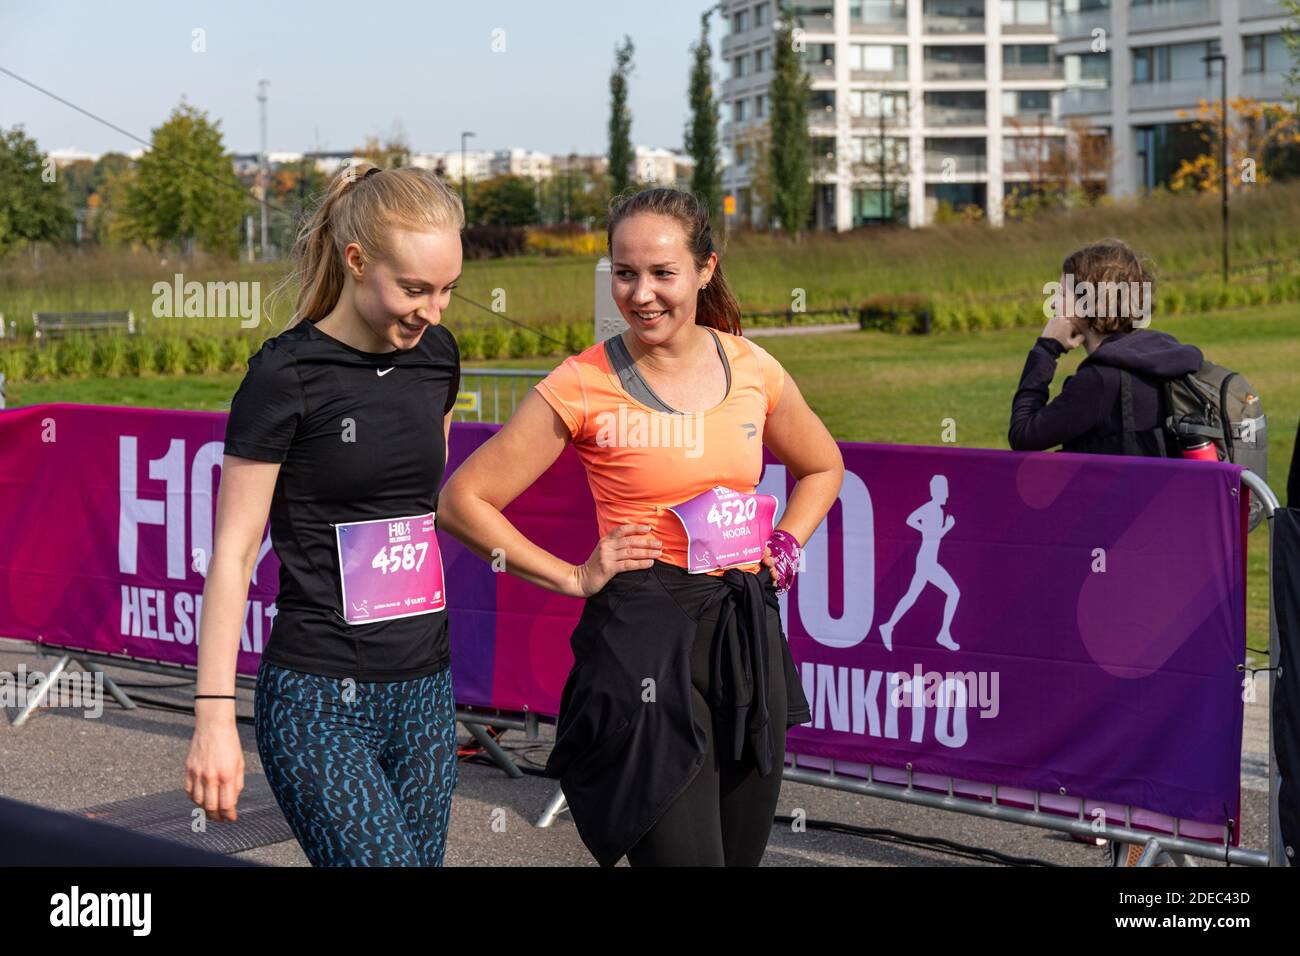 Young women after crossing the finish line of Helsinki10 or H10 running competition in Helsinki, Finland Stock Photo